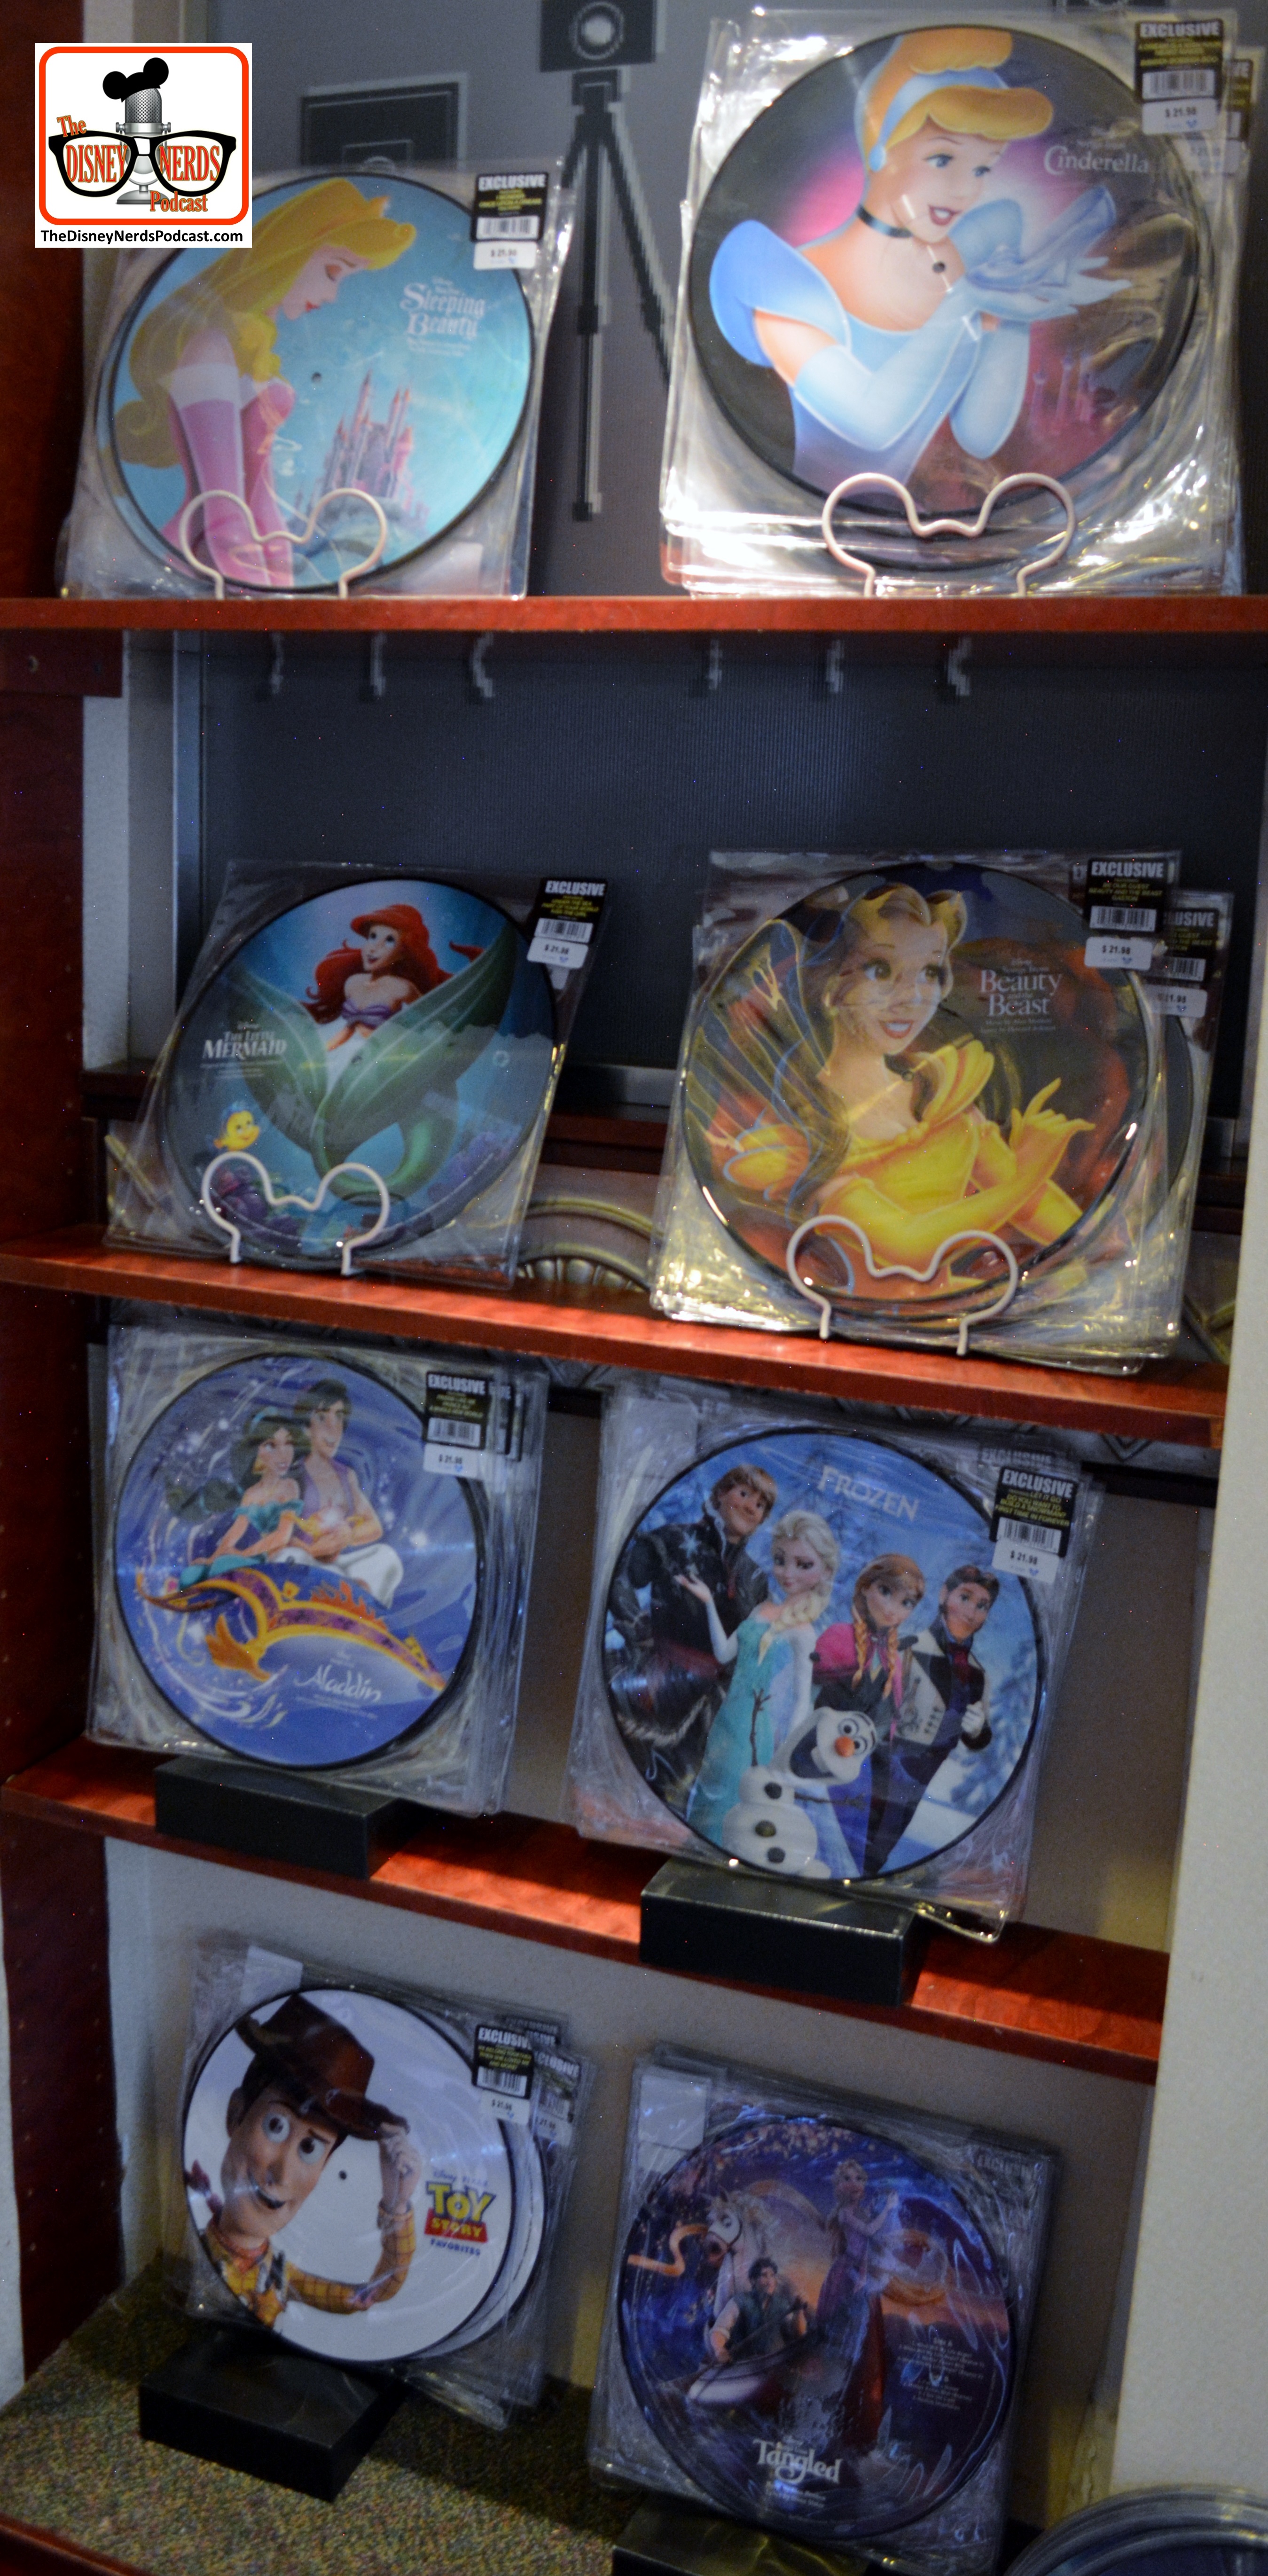 Vinyl Albums are back... found through the parks, this display was at Hollywood Studios - yes they are actual movie soundtracks that can be played on a record player